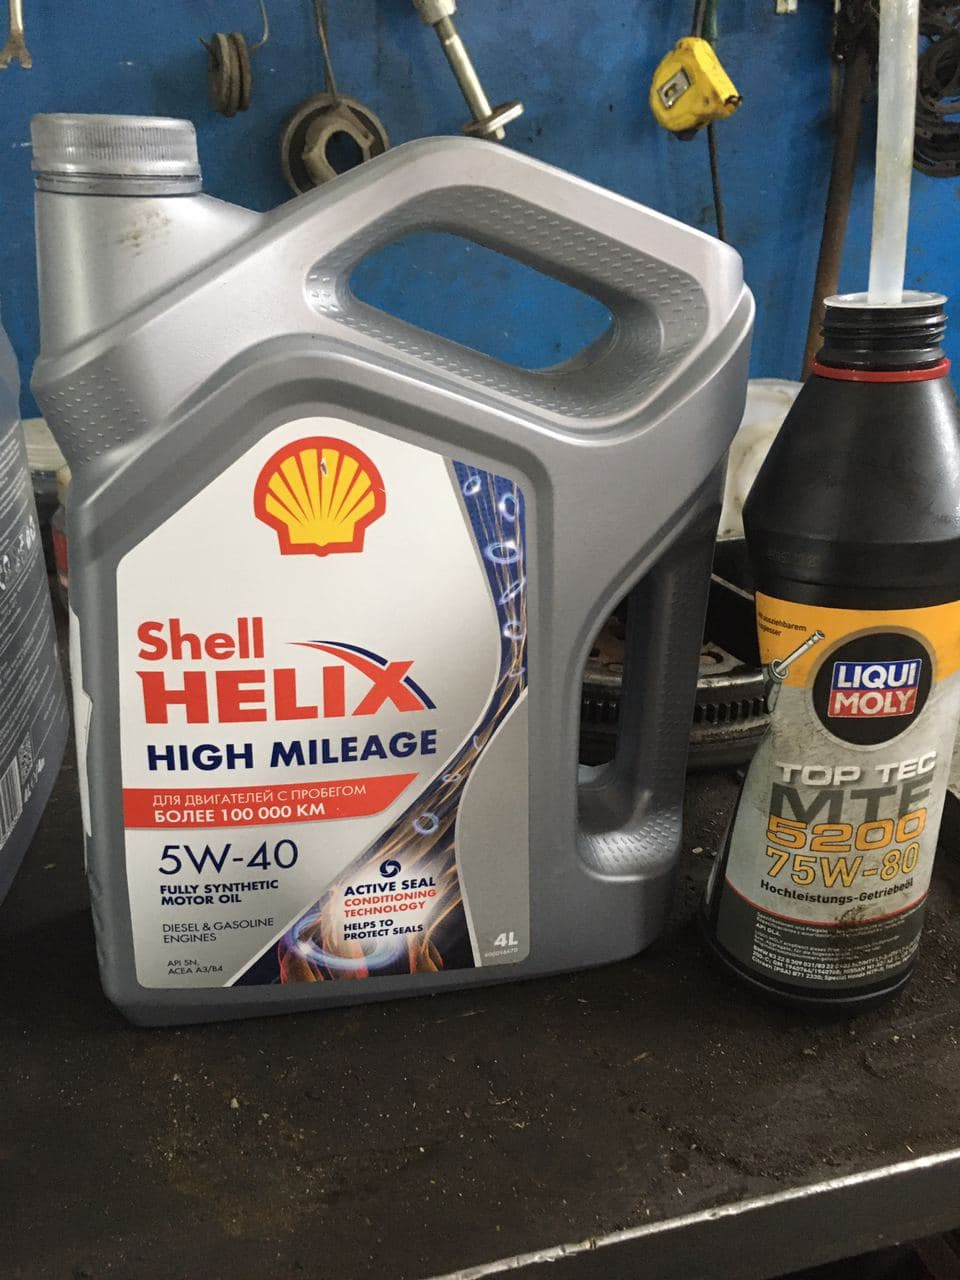 Shell high mileage